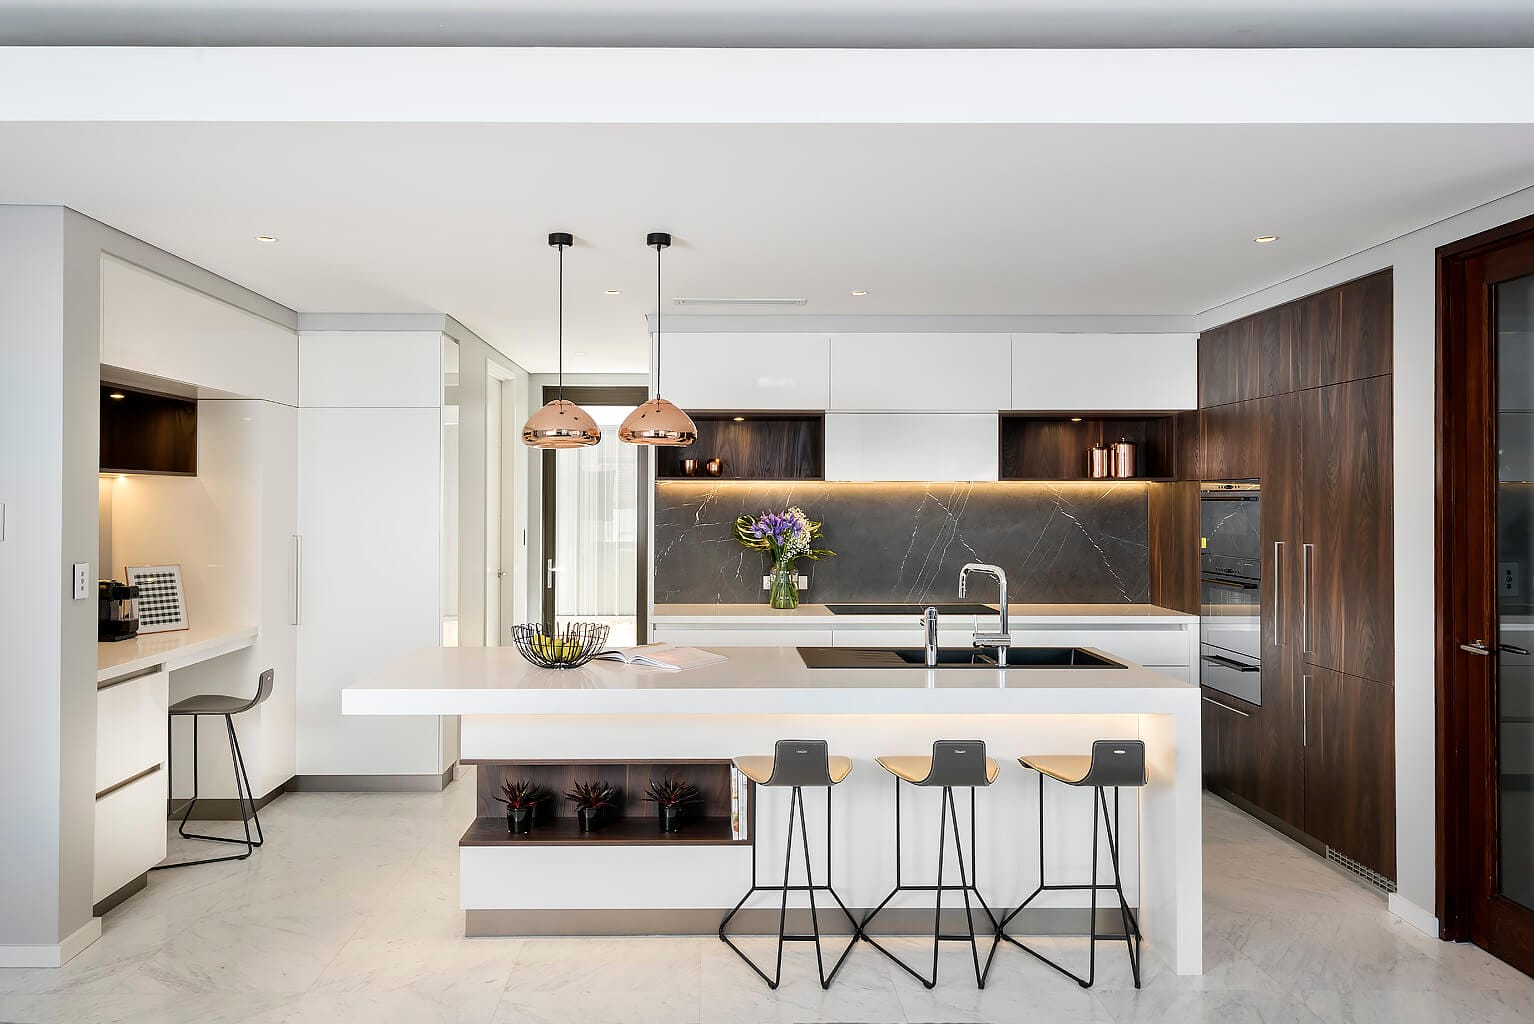 LIGHTING ESSENTIALS FOR KITCHENS IN PERTH